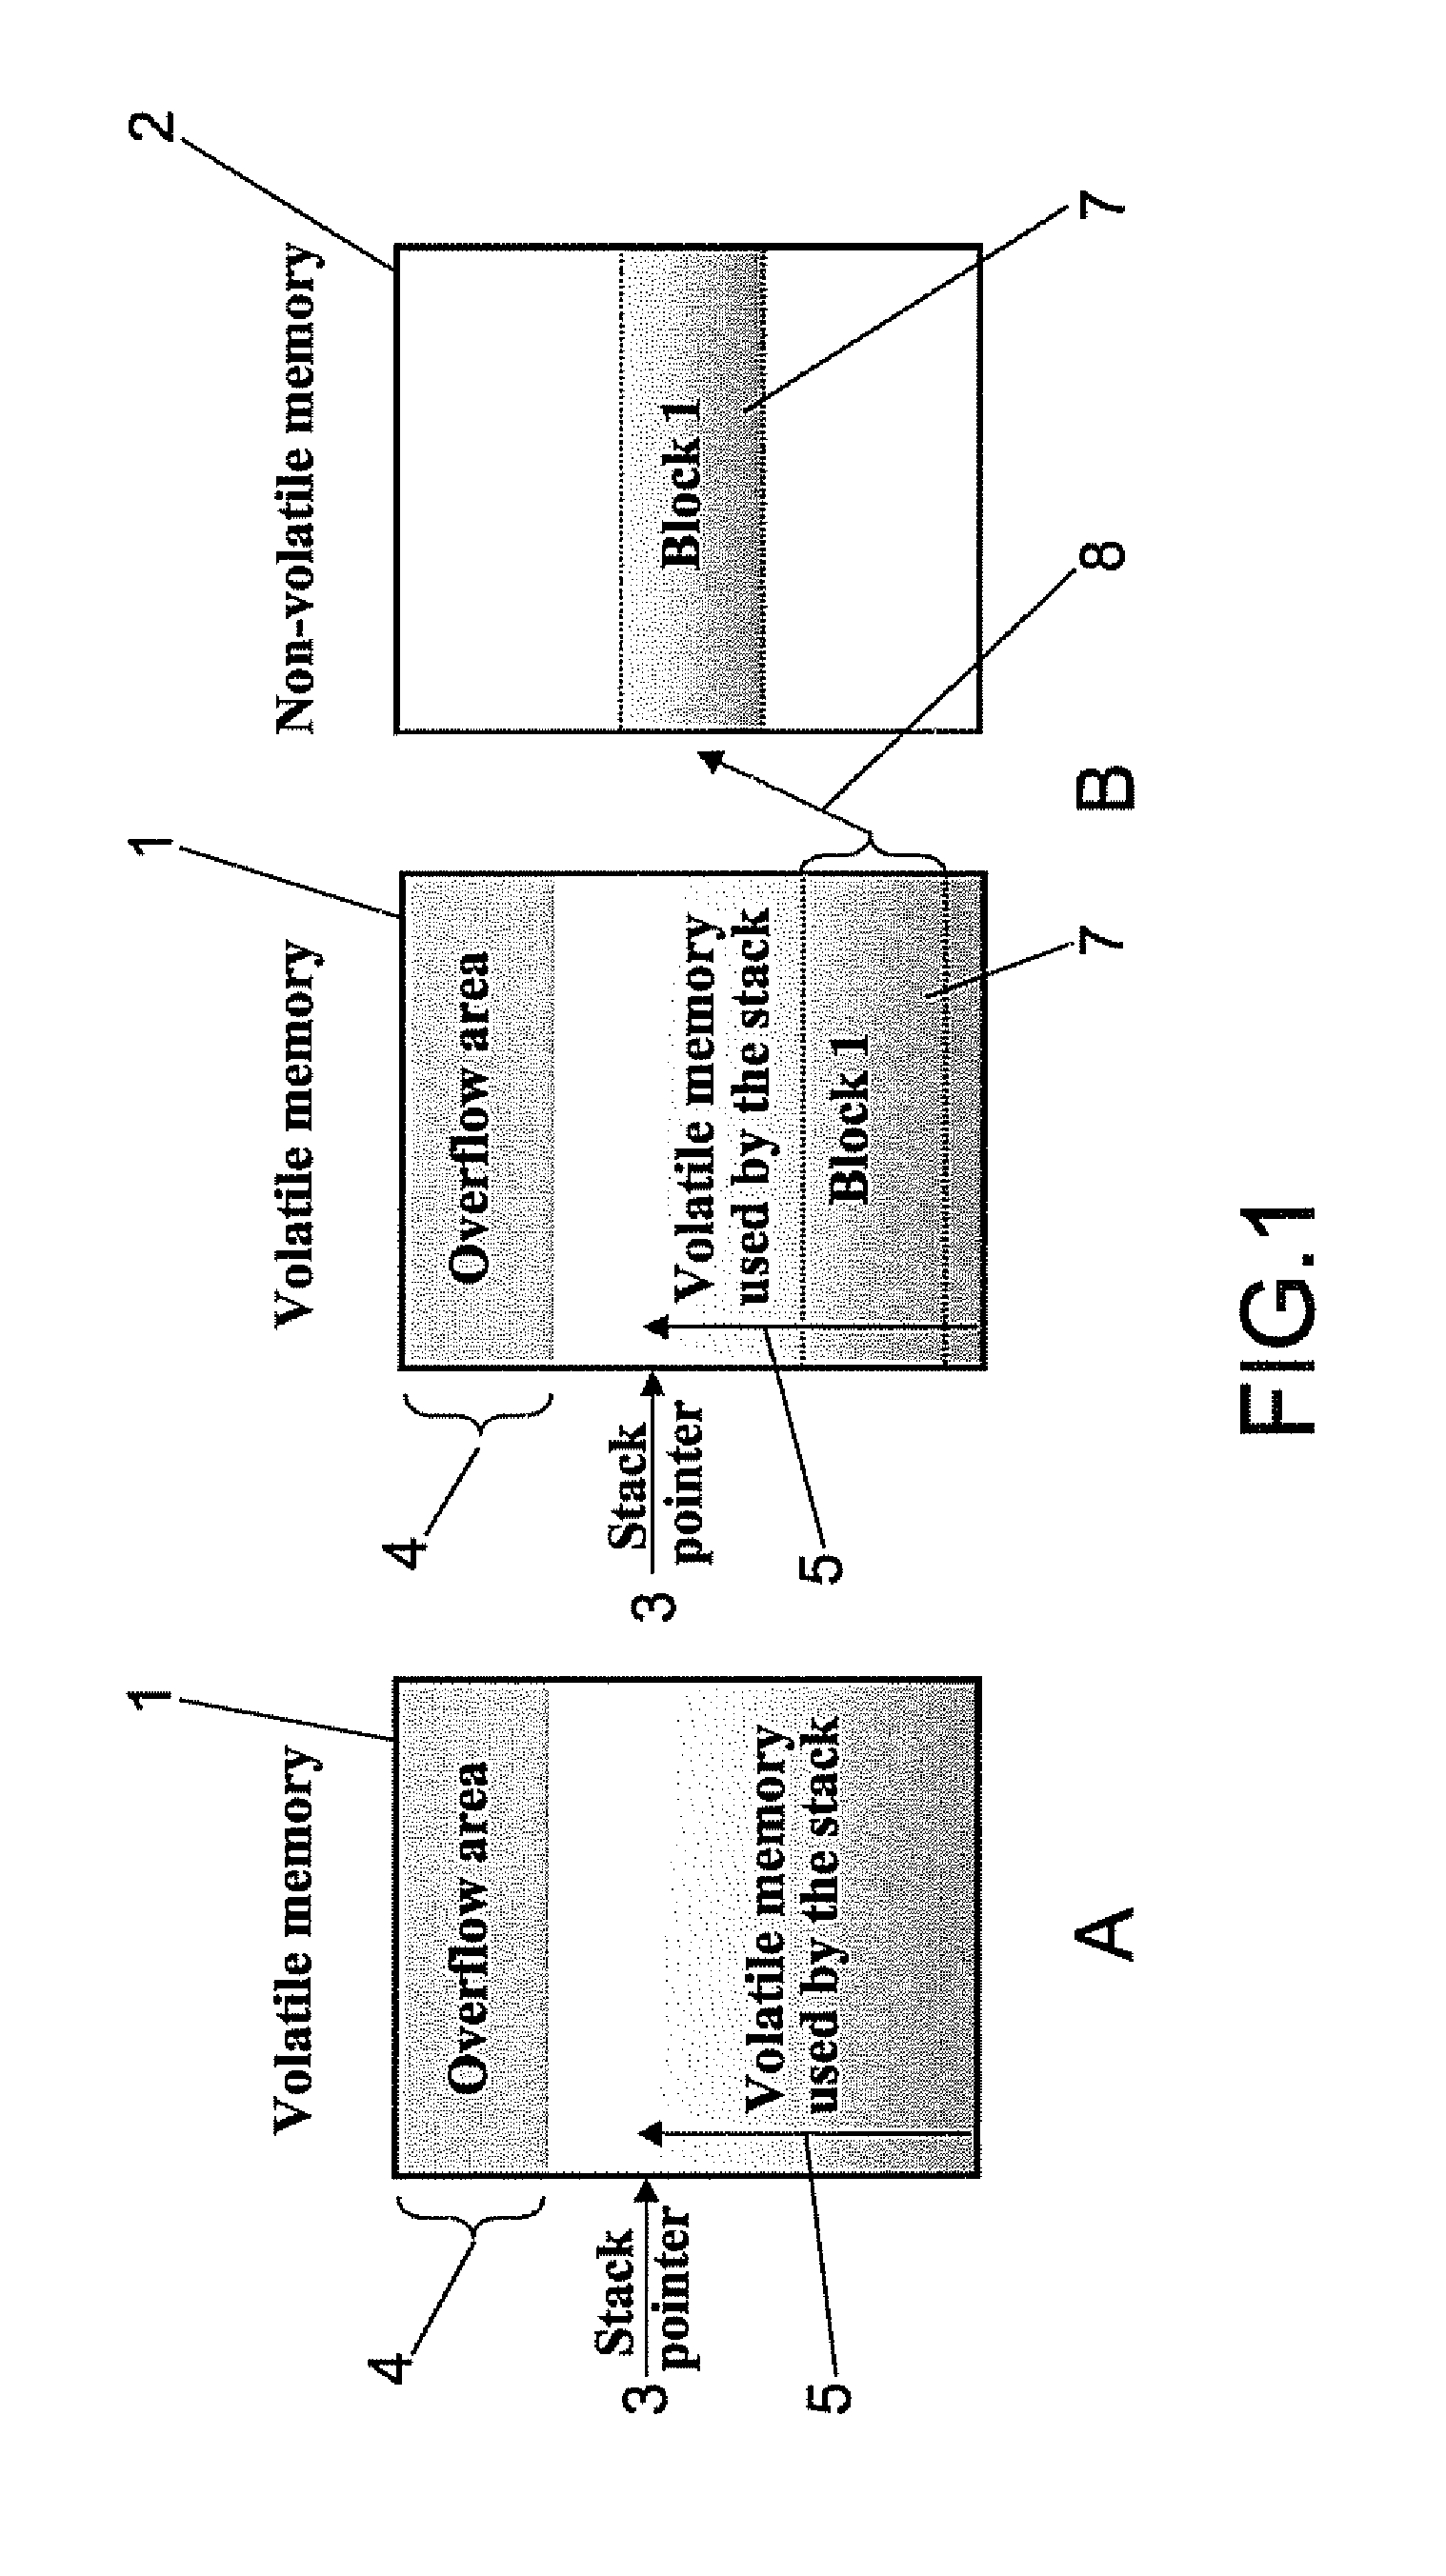 Processing Unit and Method of Memory Management in Processing Systems With Limited Resources